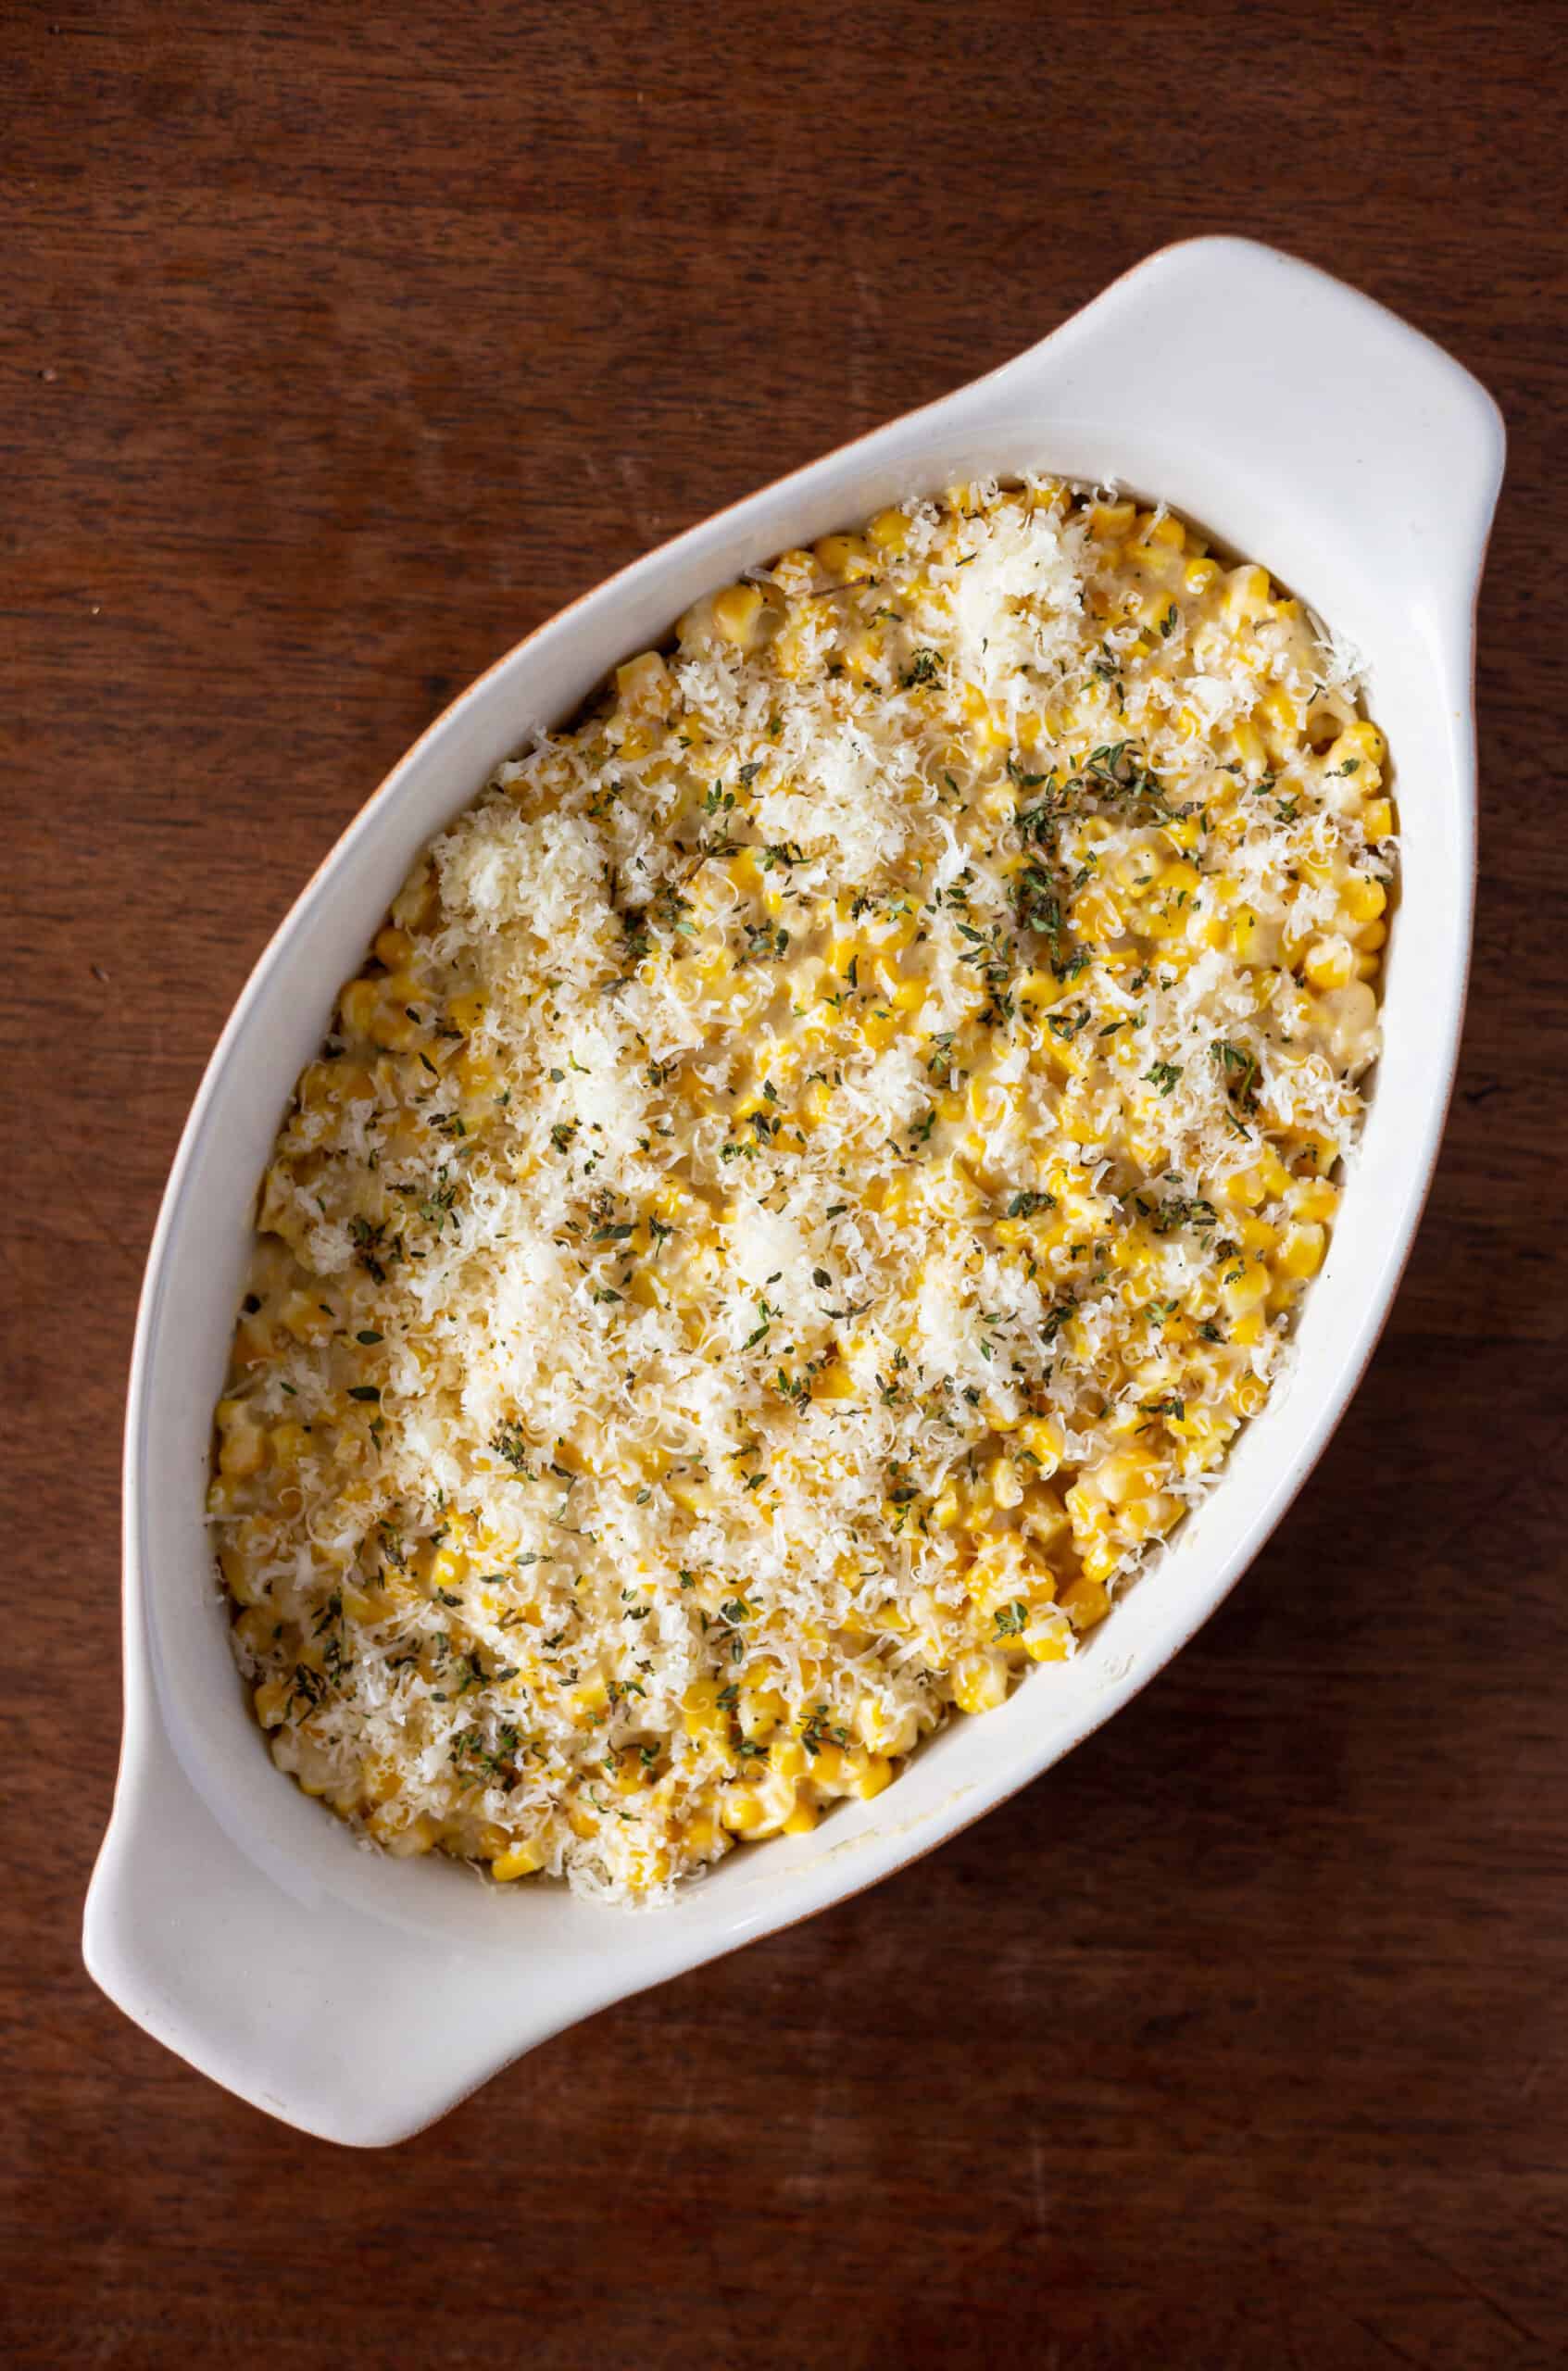 Creamed corn poured into casserole dish with parmesan cheese on top